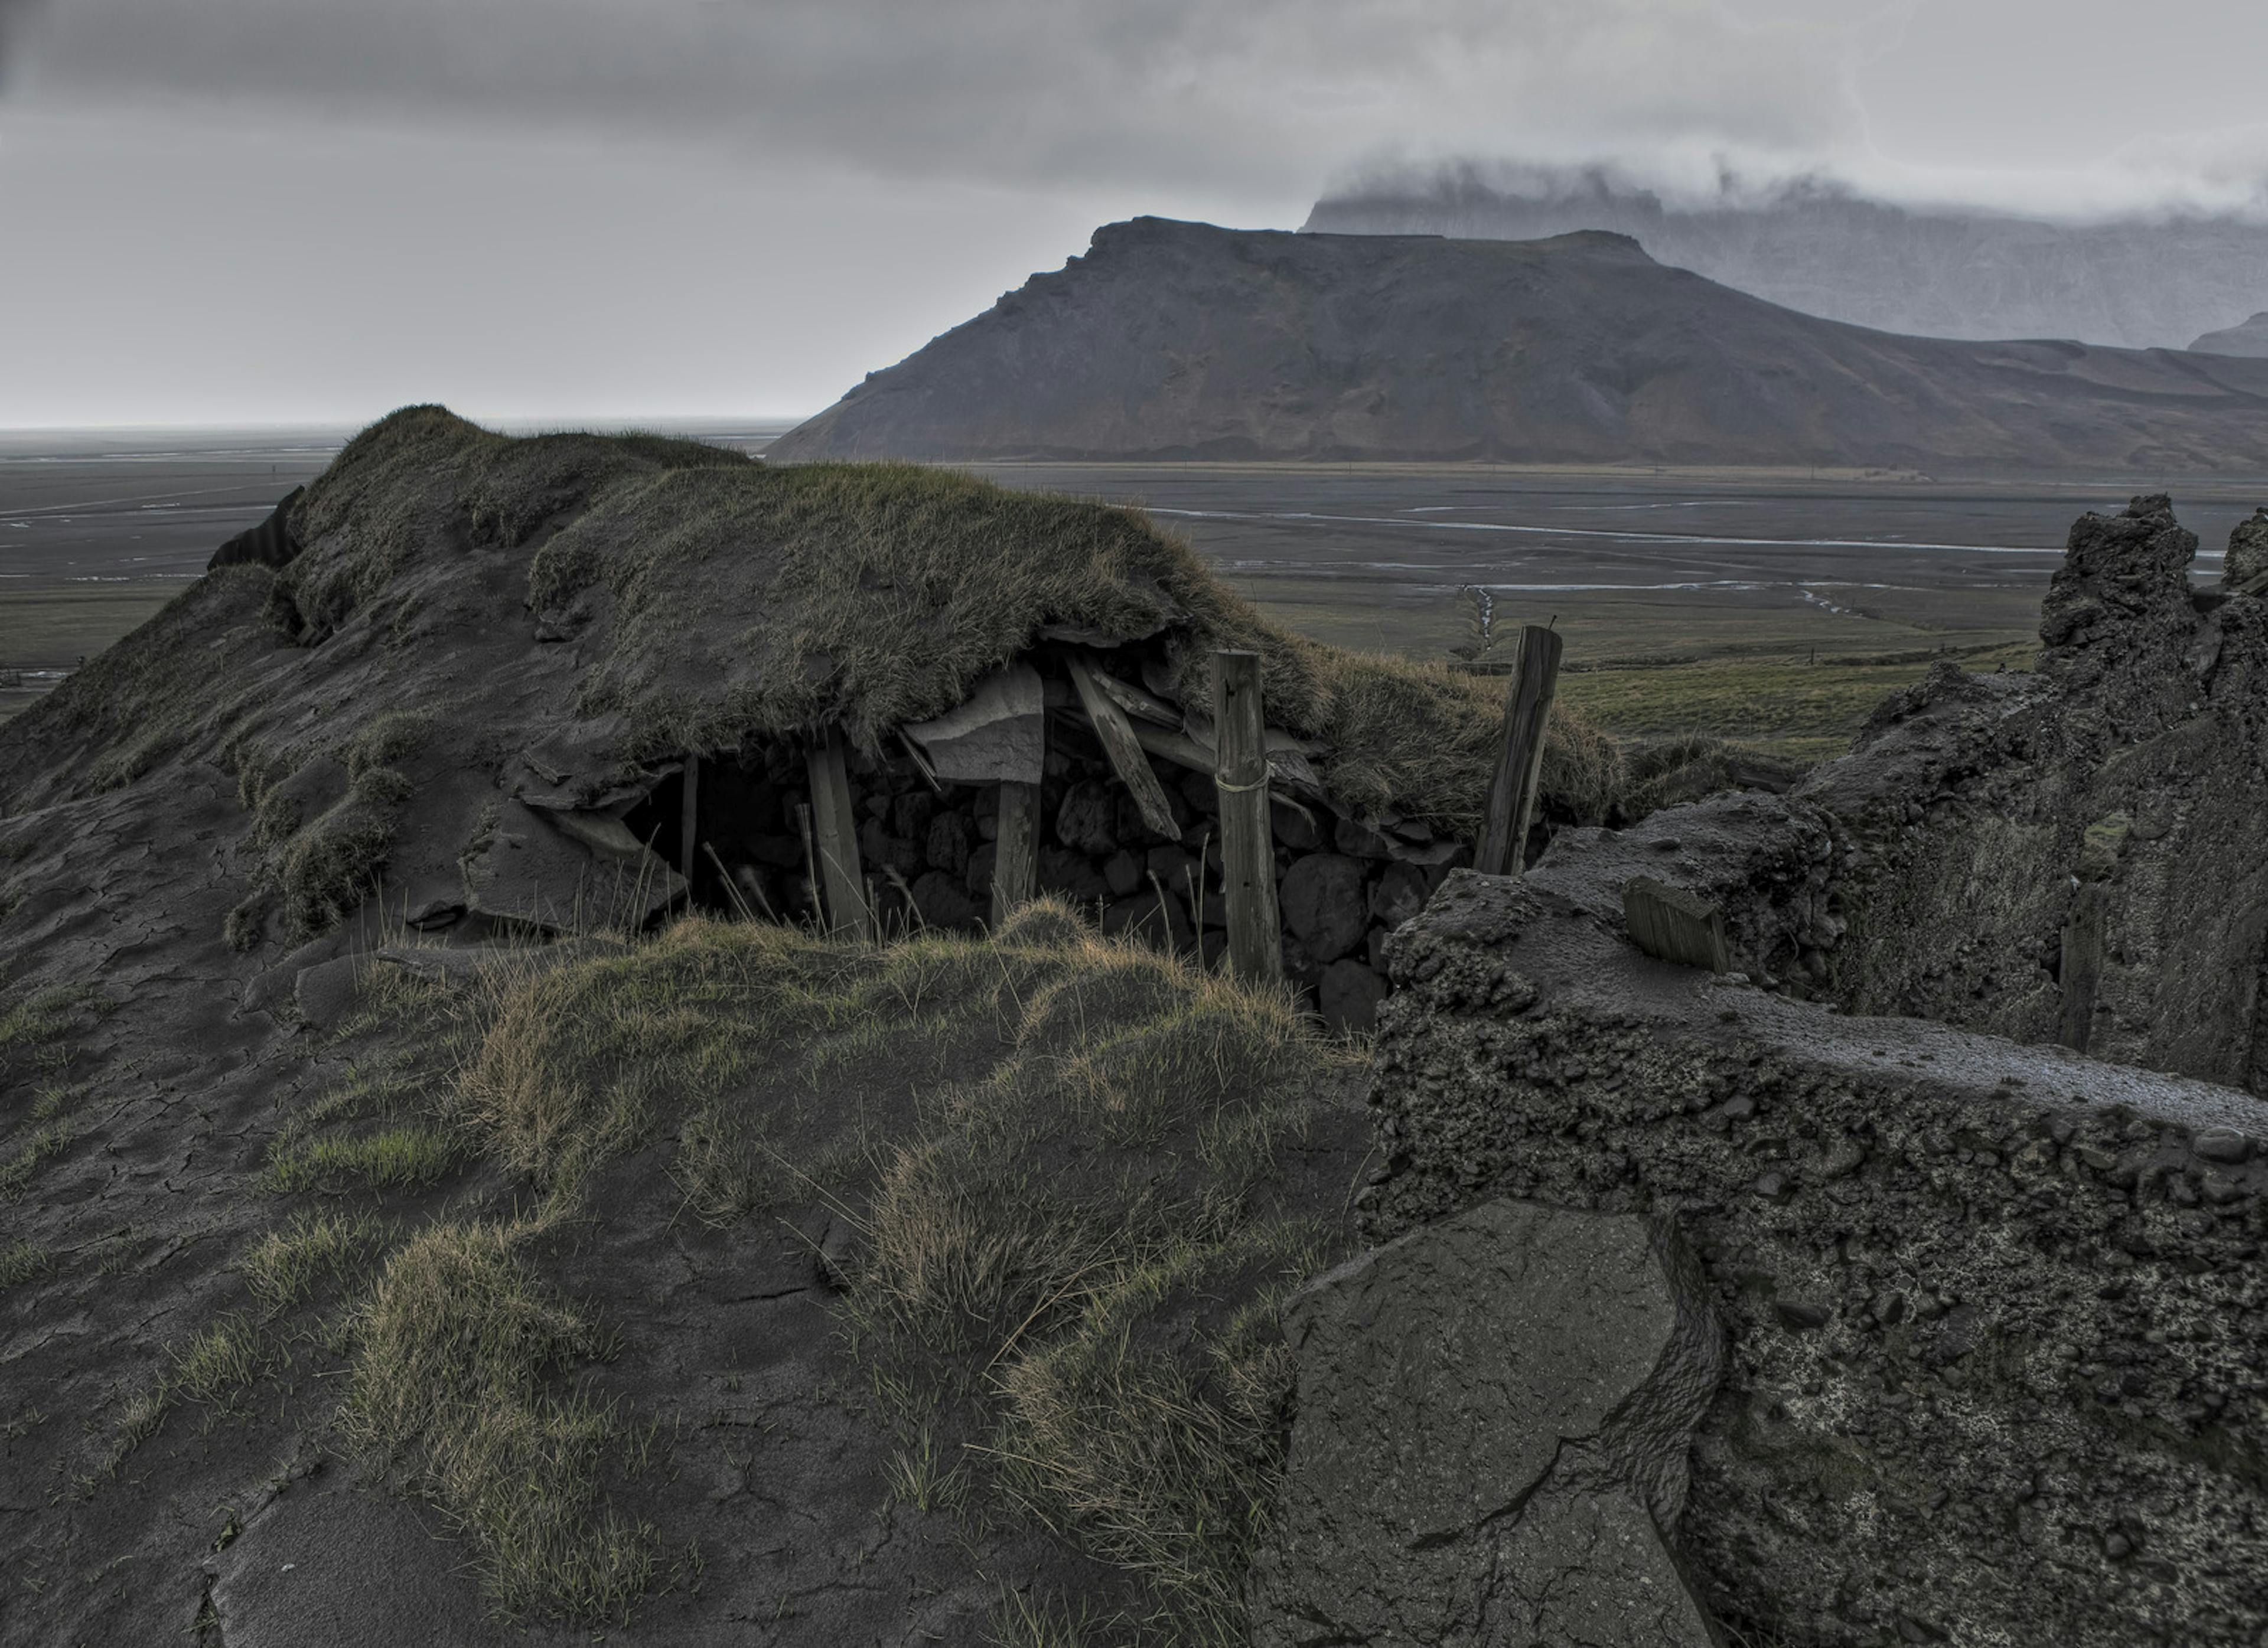 Ash covered farm from phreatomagmatic eruption in Iceland